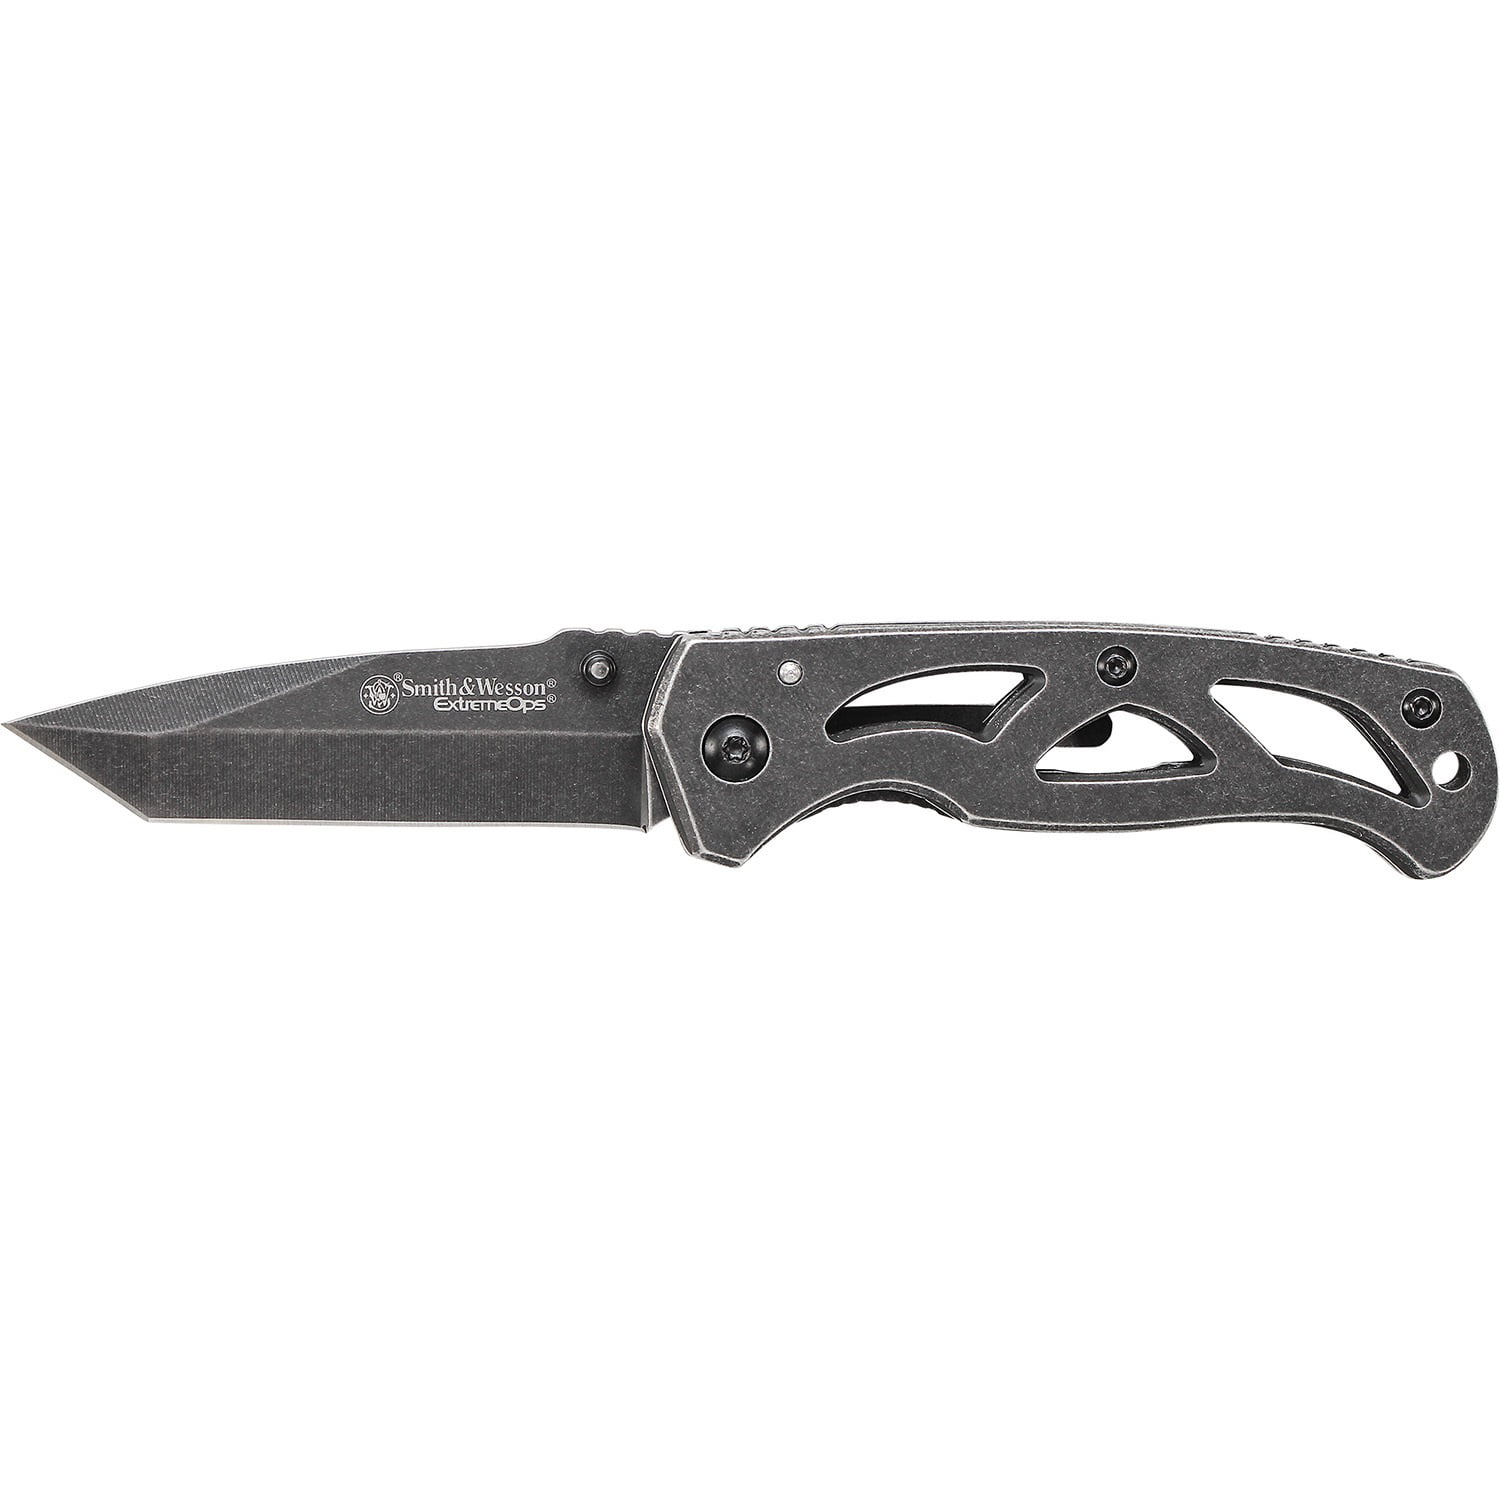 Smith & Wesson Extreme Ops Tanto SILVER Serrated CK11HS 